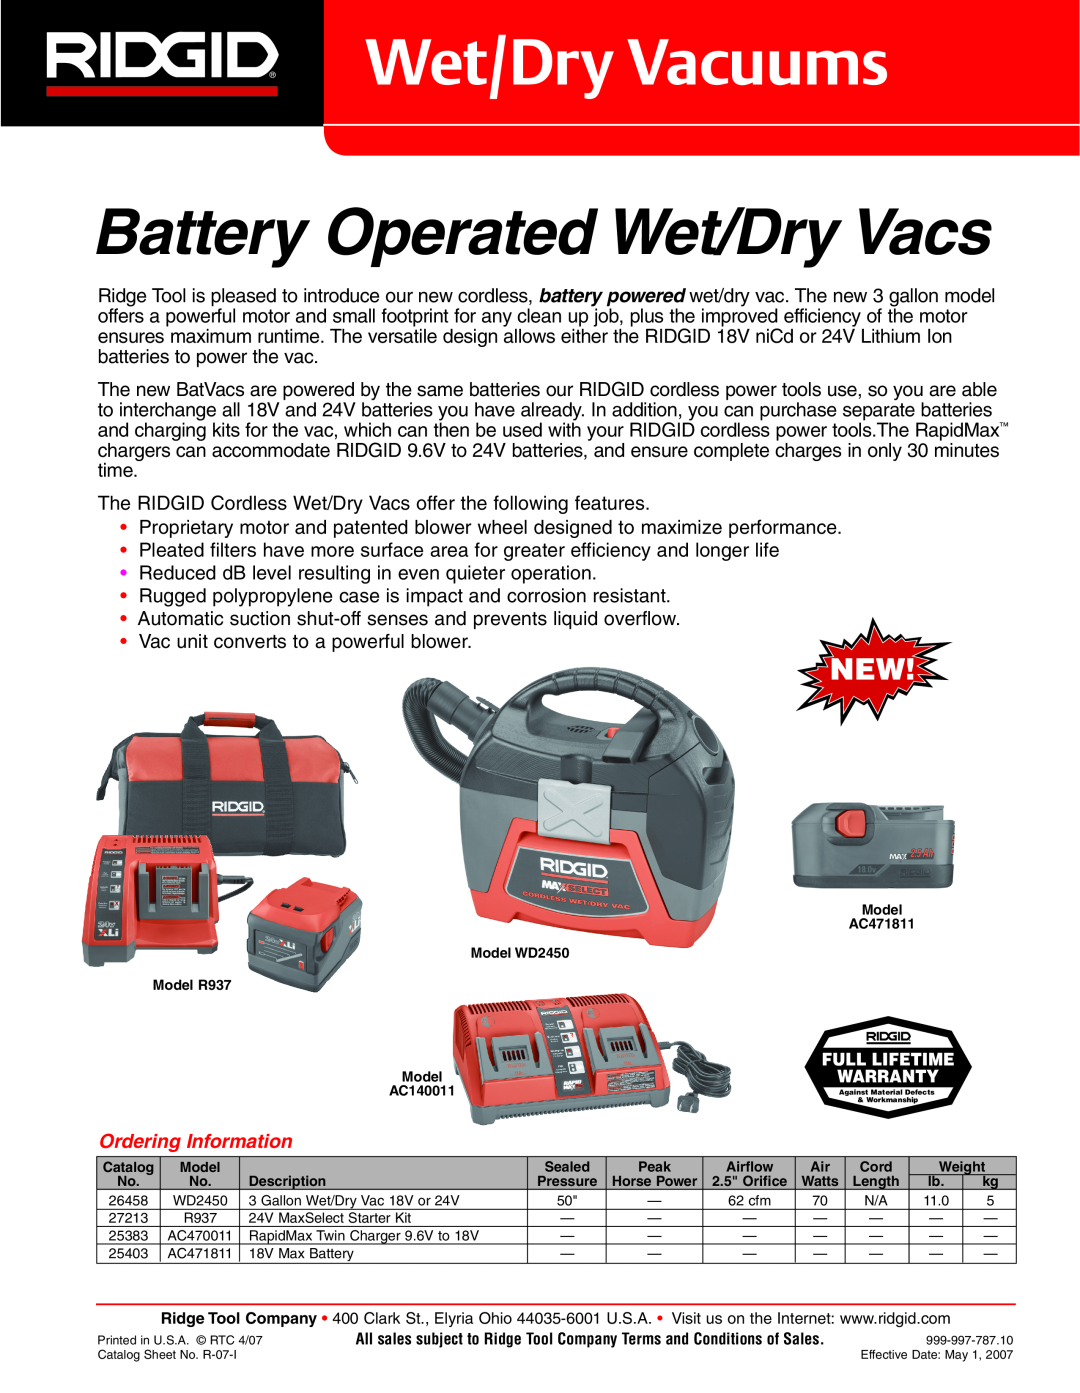 RIDGID AC471811, WD2450, AC140011, R937 warranty Wet/Dry Vacuums, Battery Operated Wet/Dry Vacs, Ordering Information 